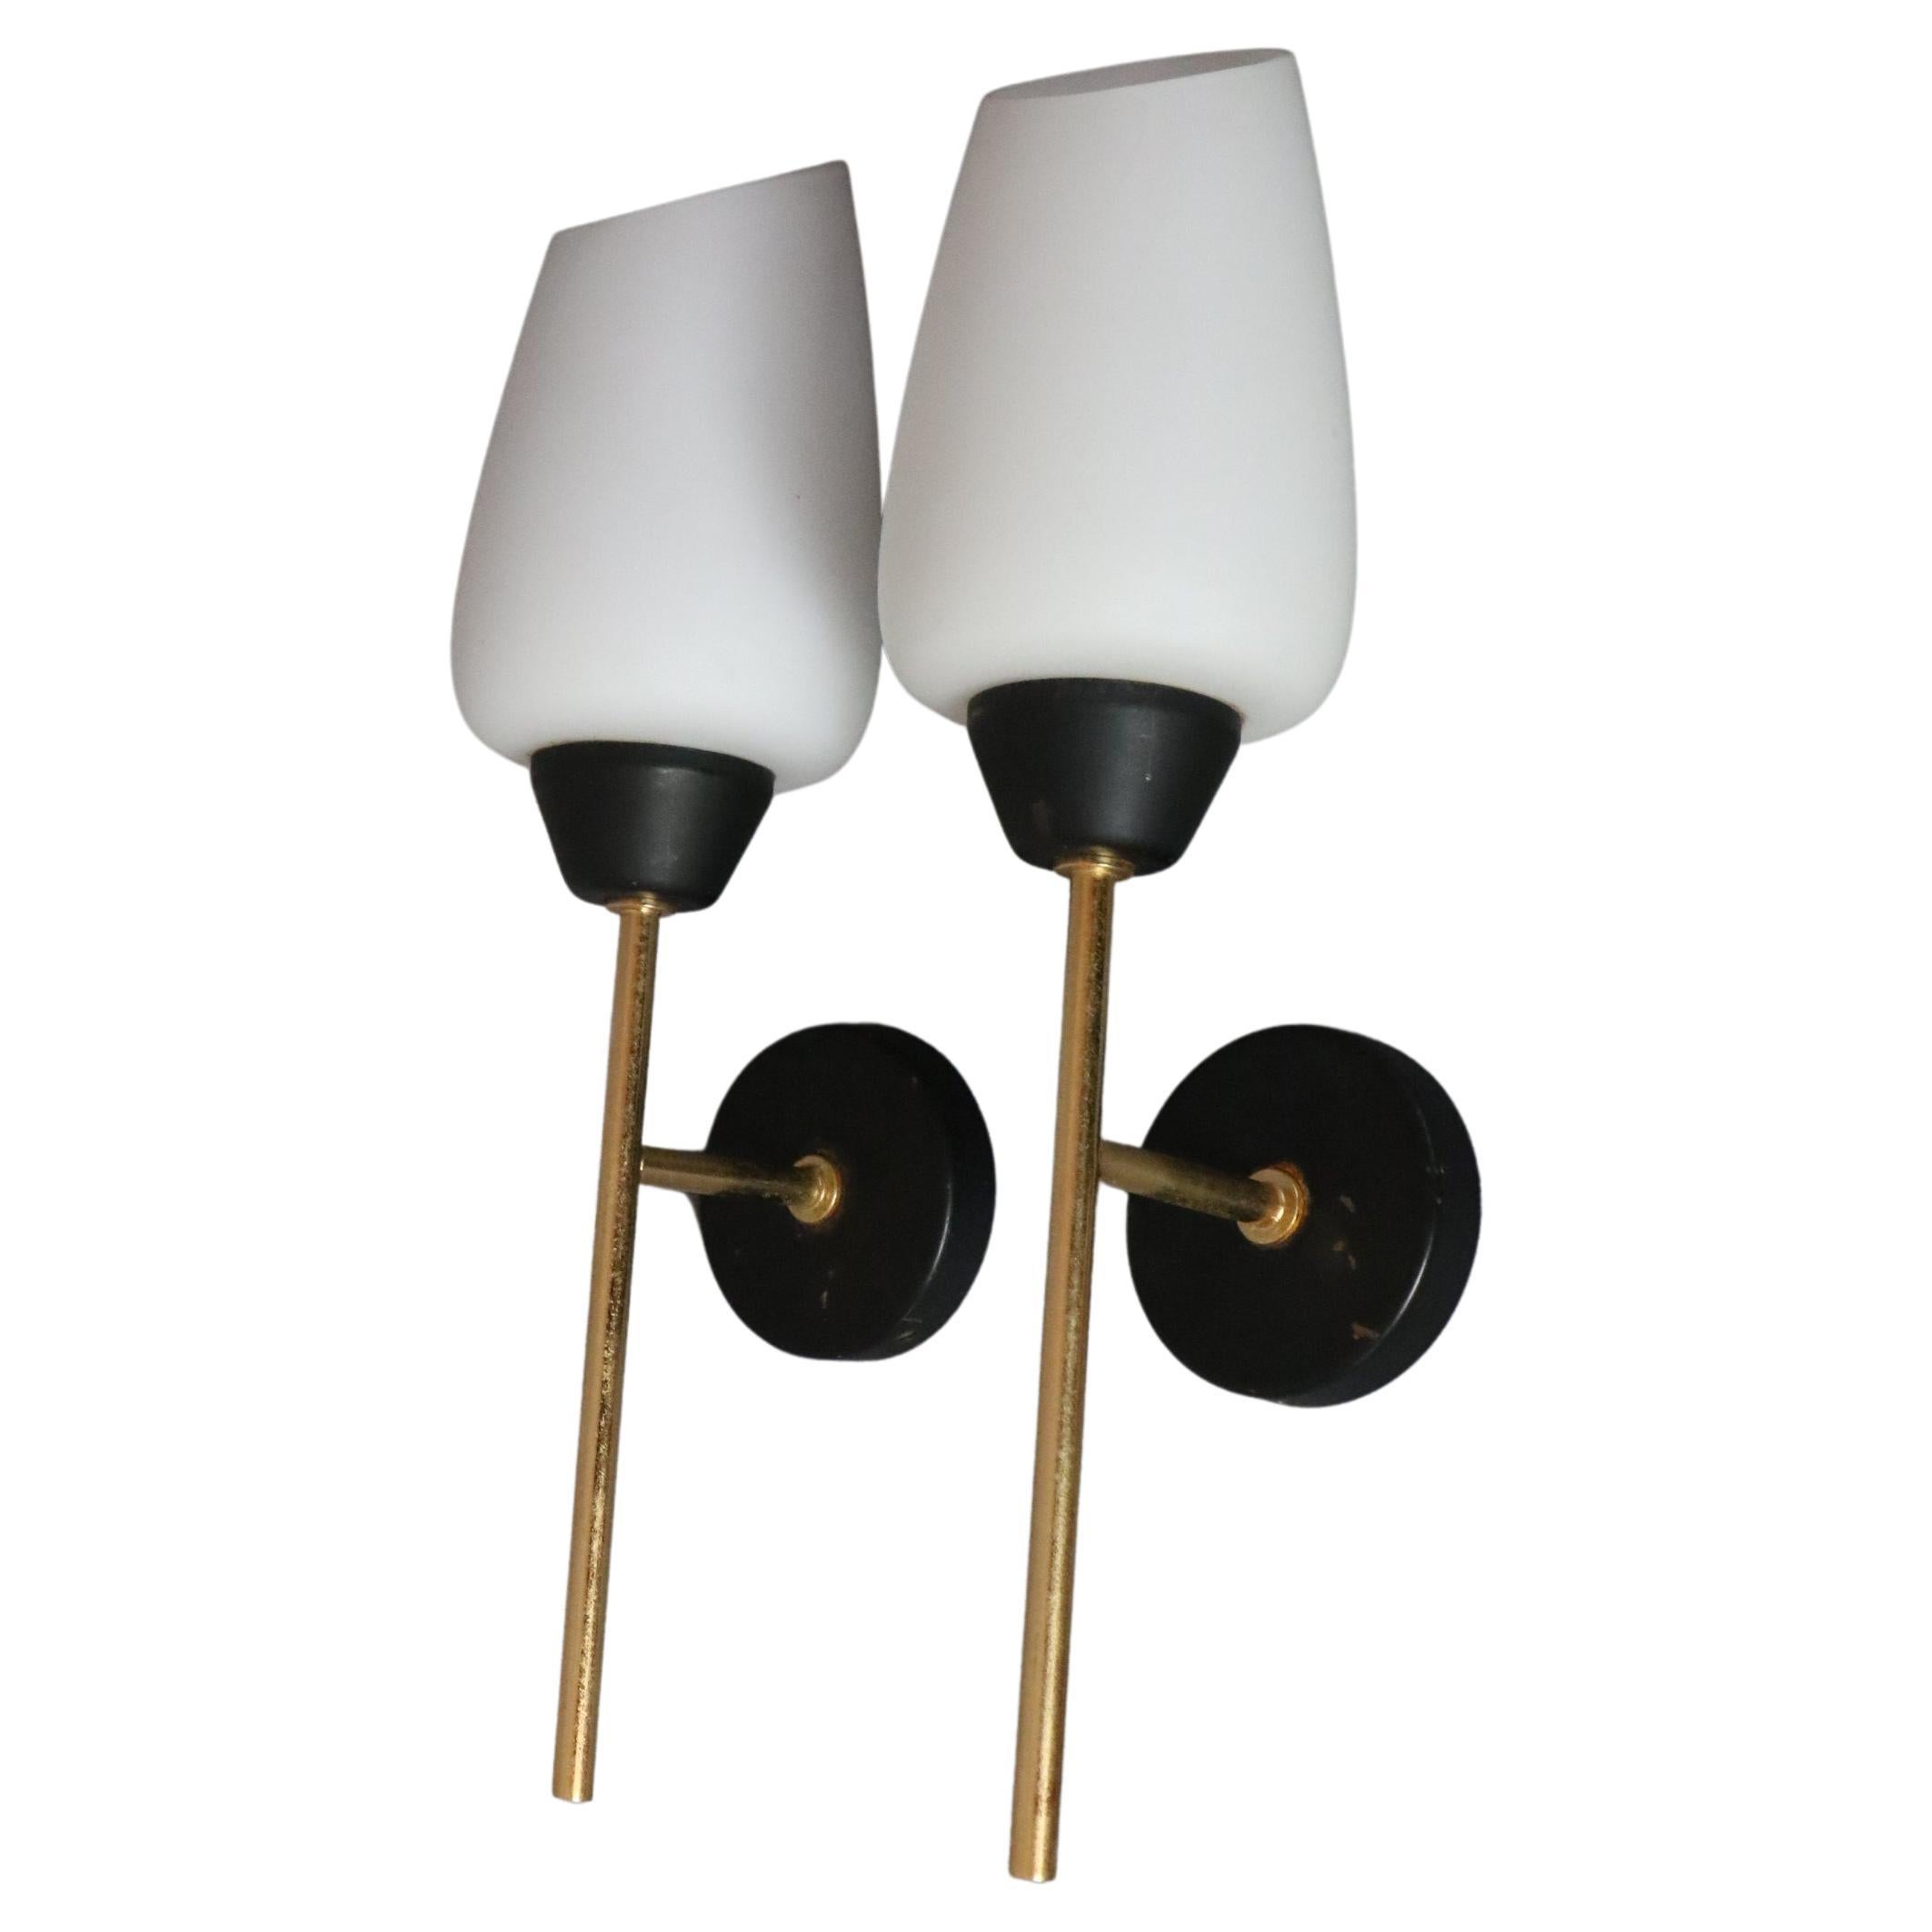 Maison Lunel - Pair of Mid-Century Modern Wall lights - 1950s France 5